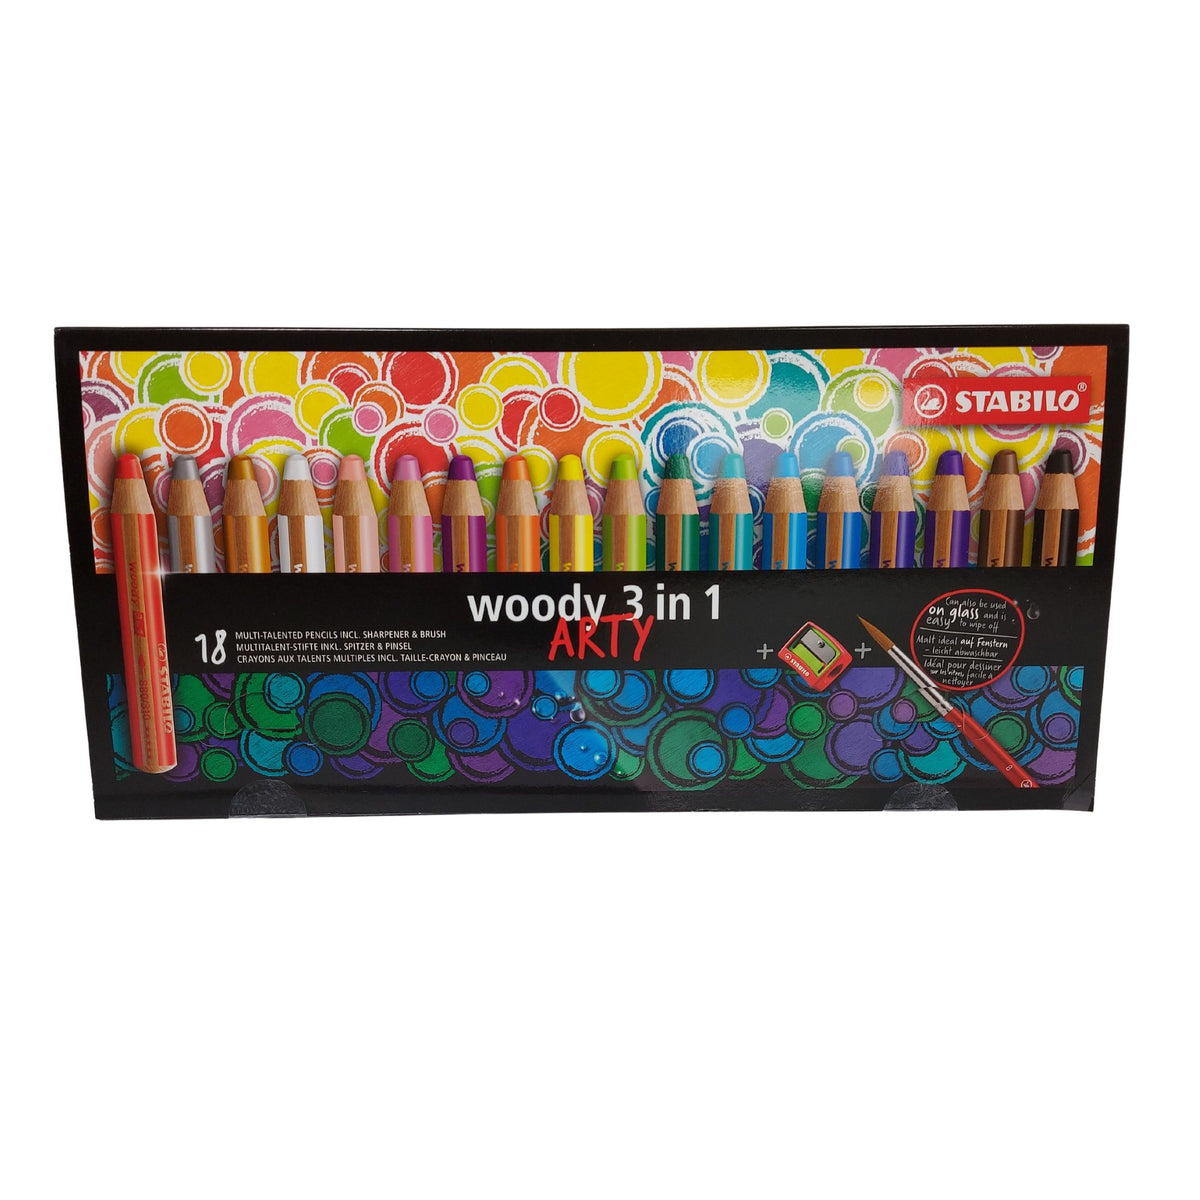 Stabilo Woody 3 in 1 Pencil Crayons (Set of 18)